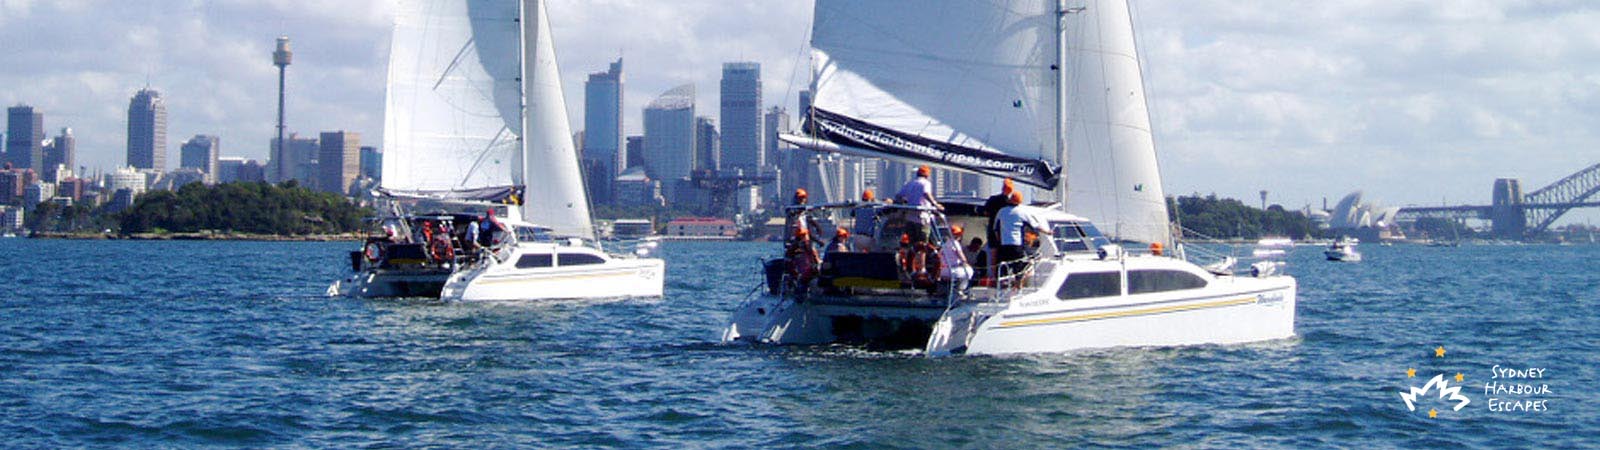 Corporate Sailing Regattas and Hands on Sailing Banner